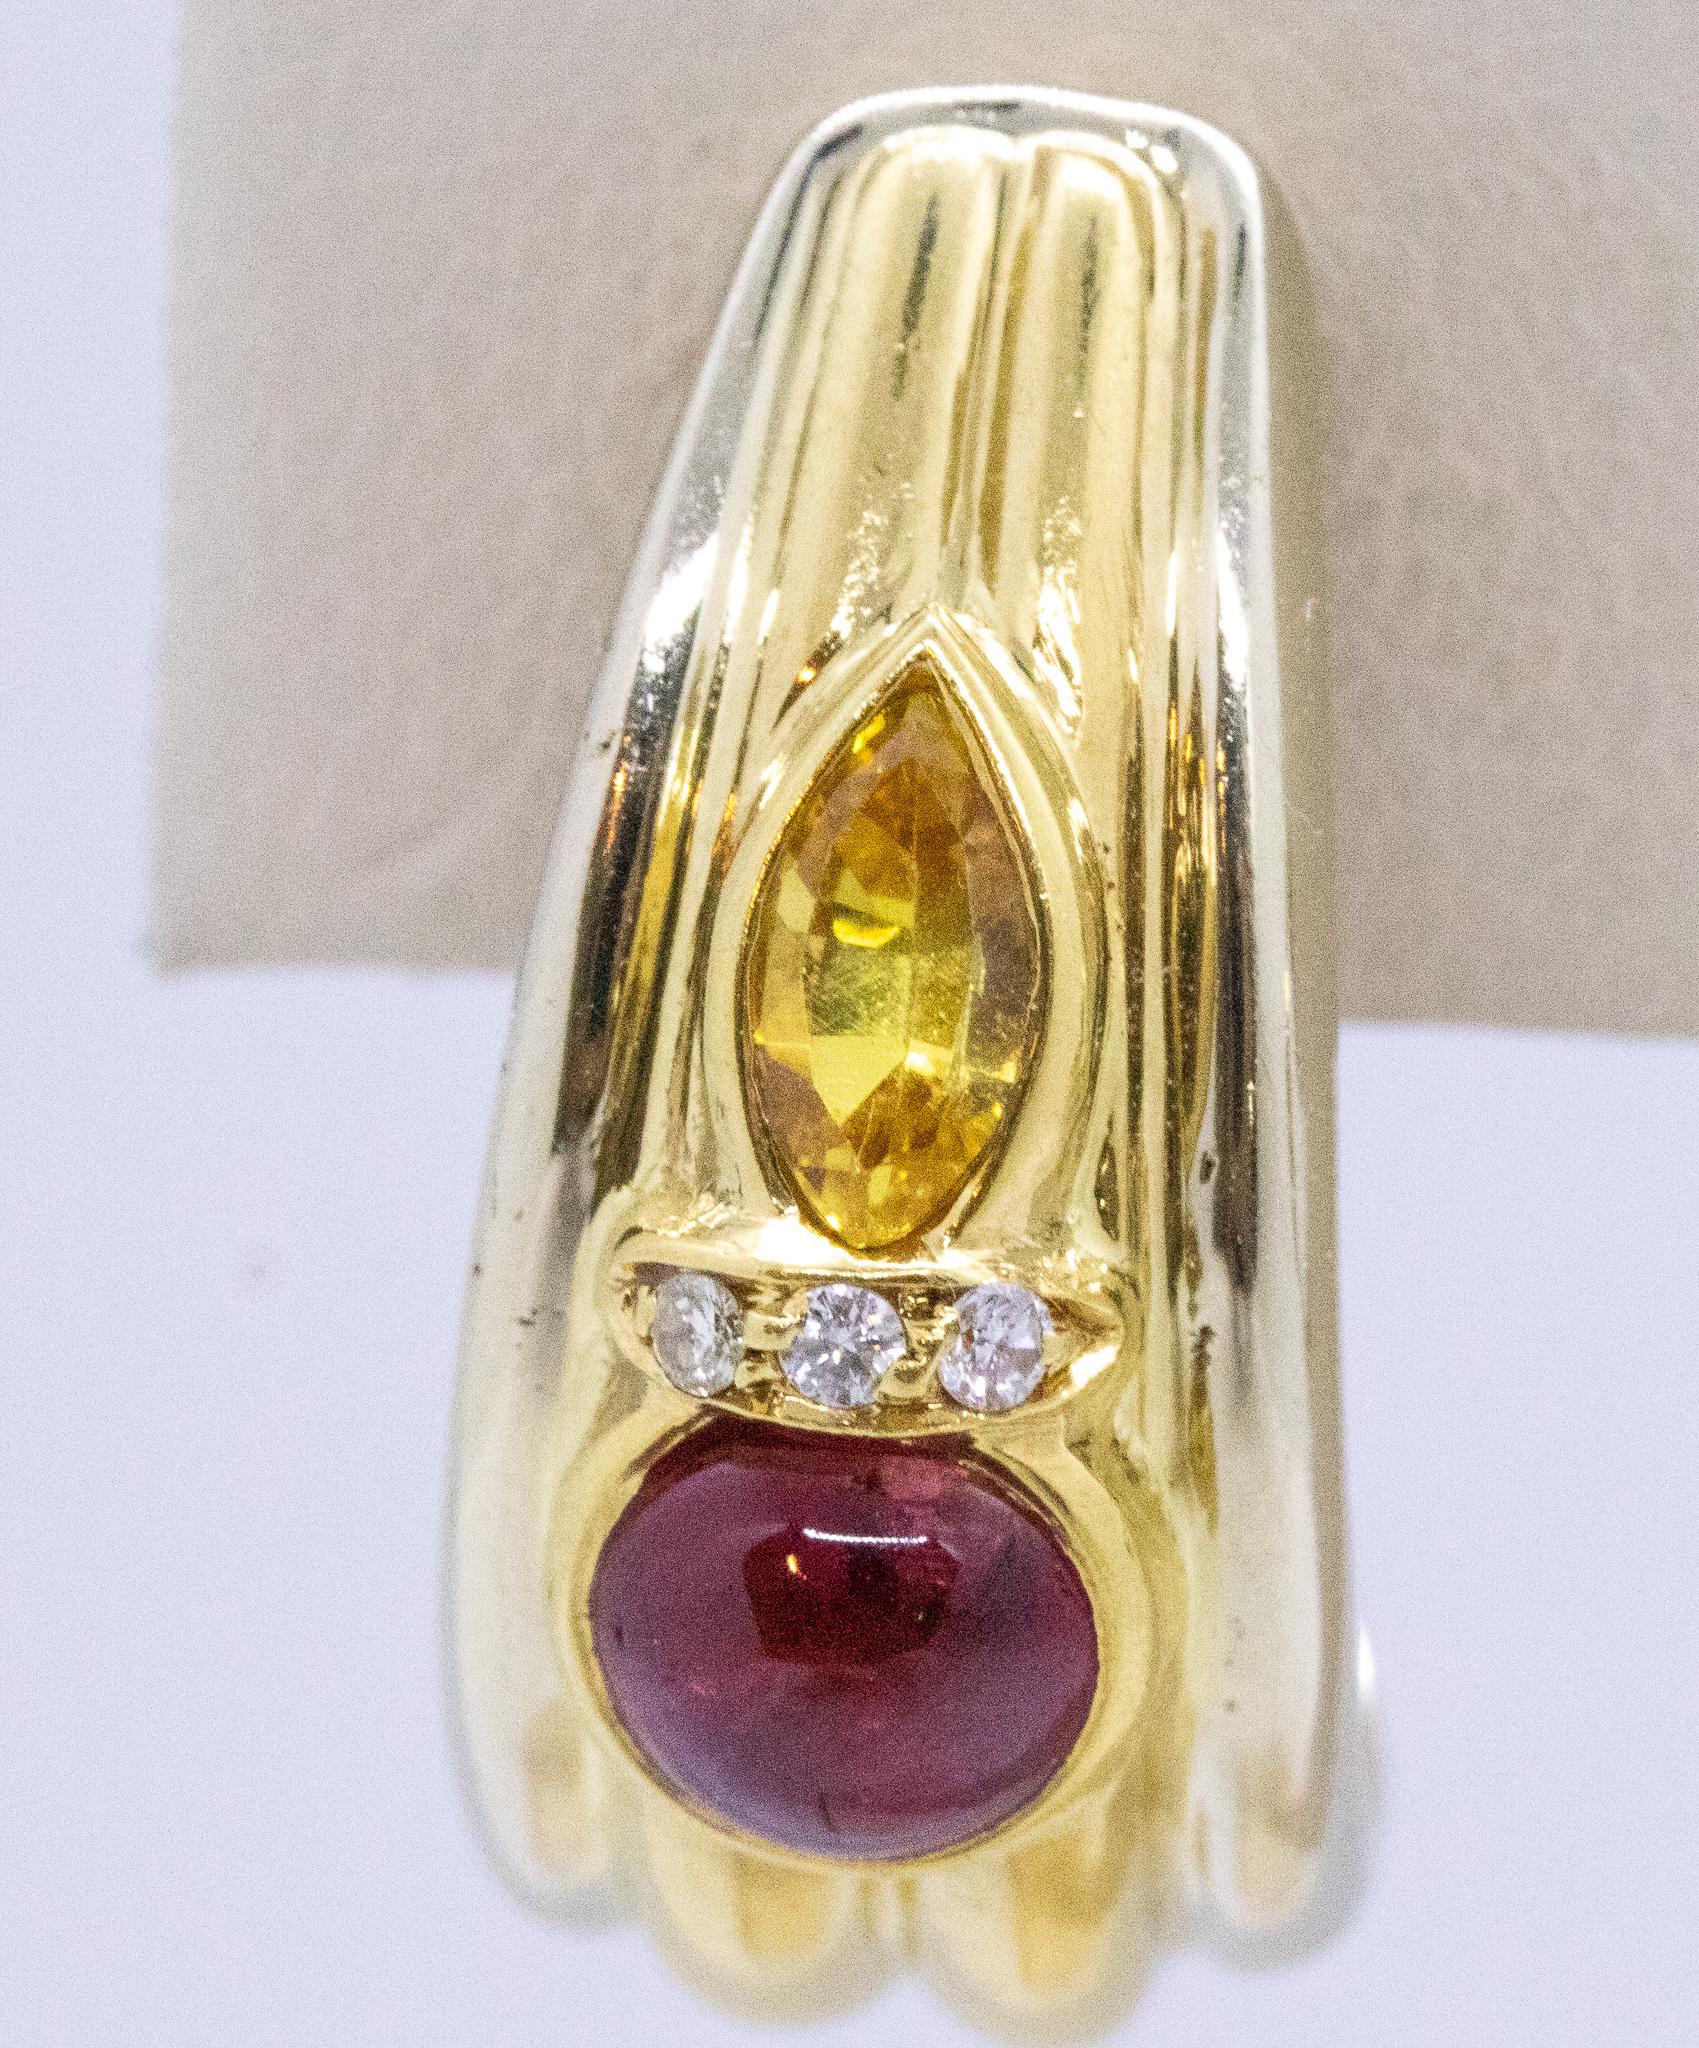 Chaumet Paris Clips Earrings in 18Kt Gold with 2.34 Cts Rubies Sapphires Diamond 4